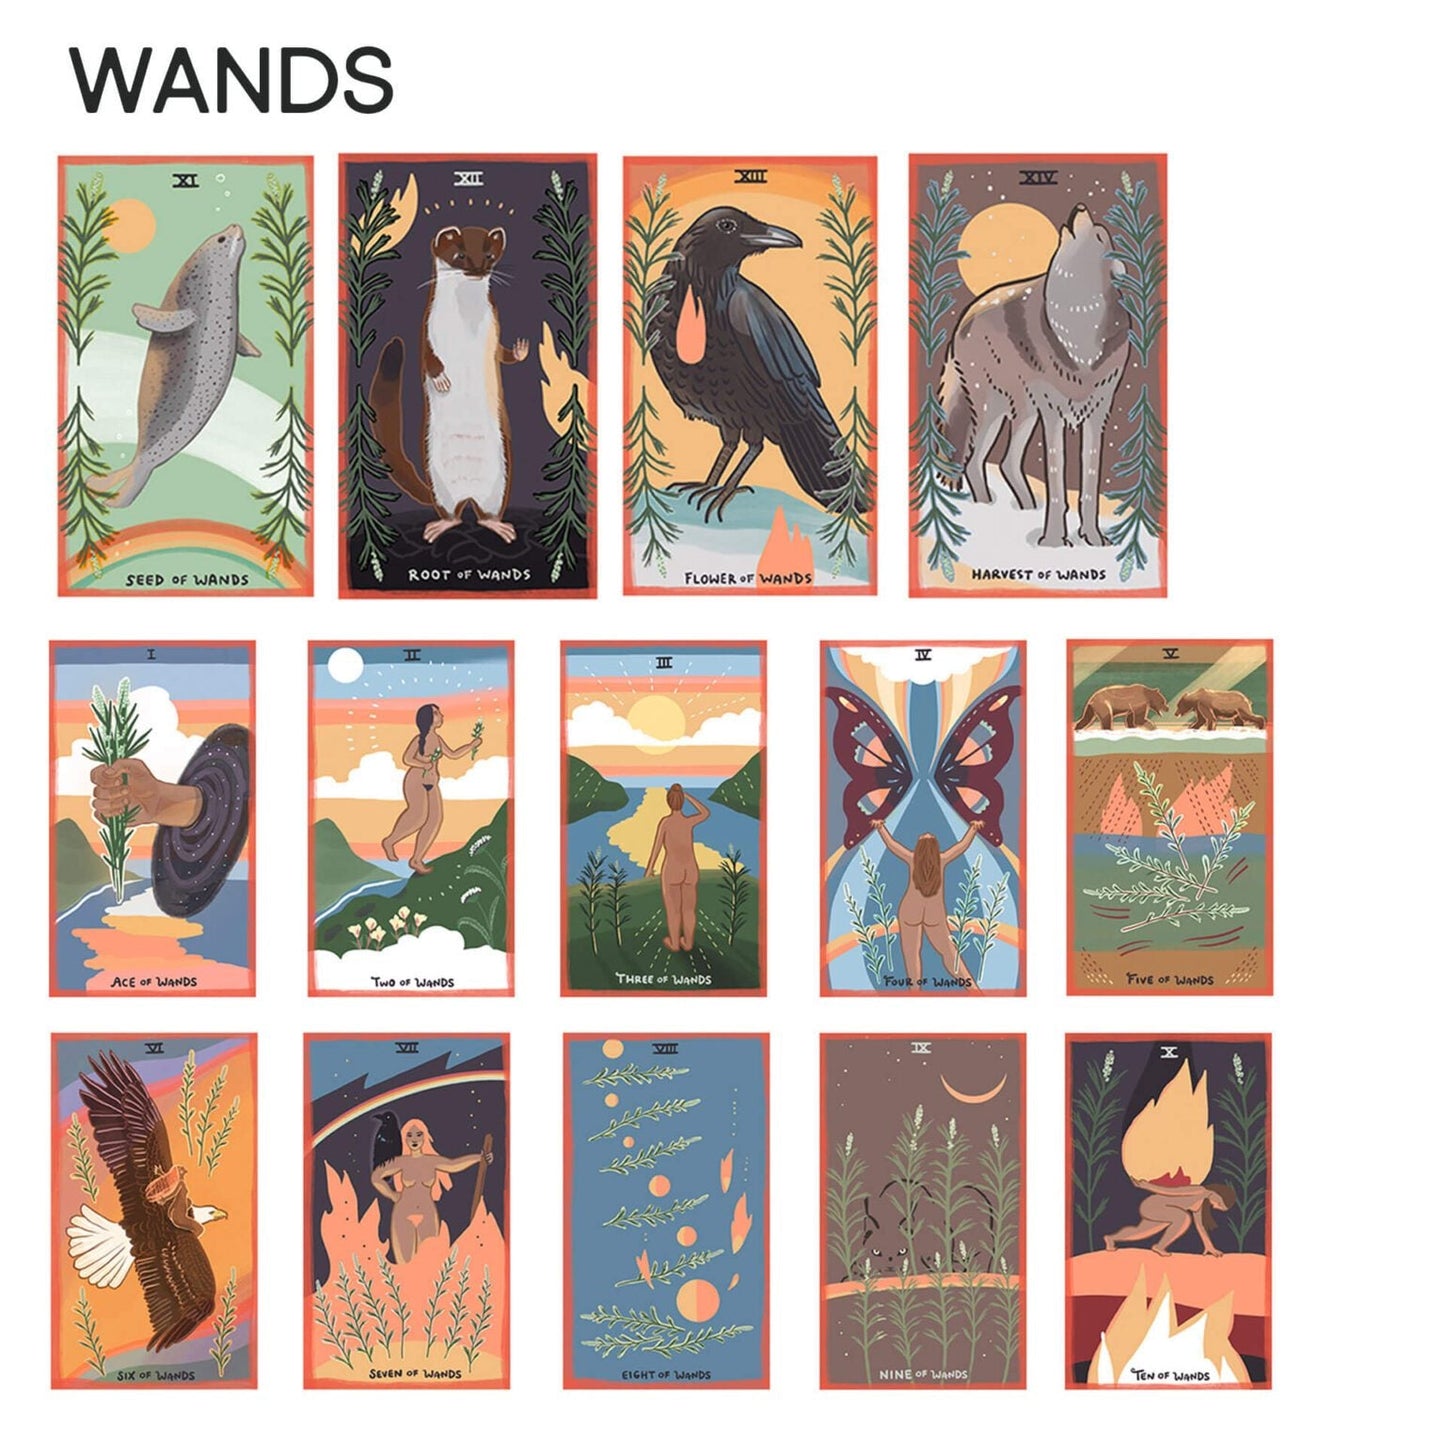 The Wands cards from the Gentle Tarot deck.